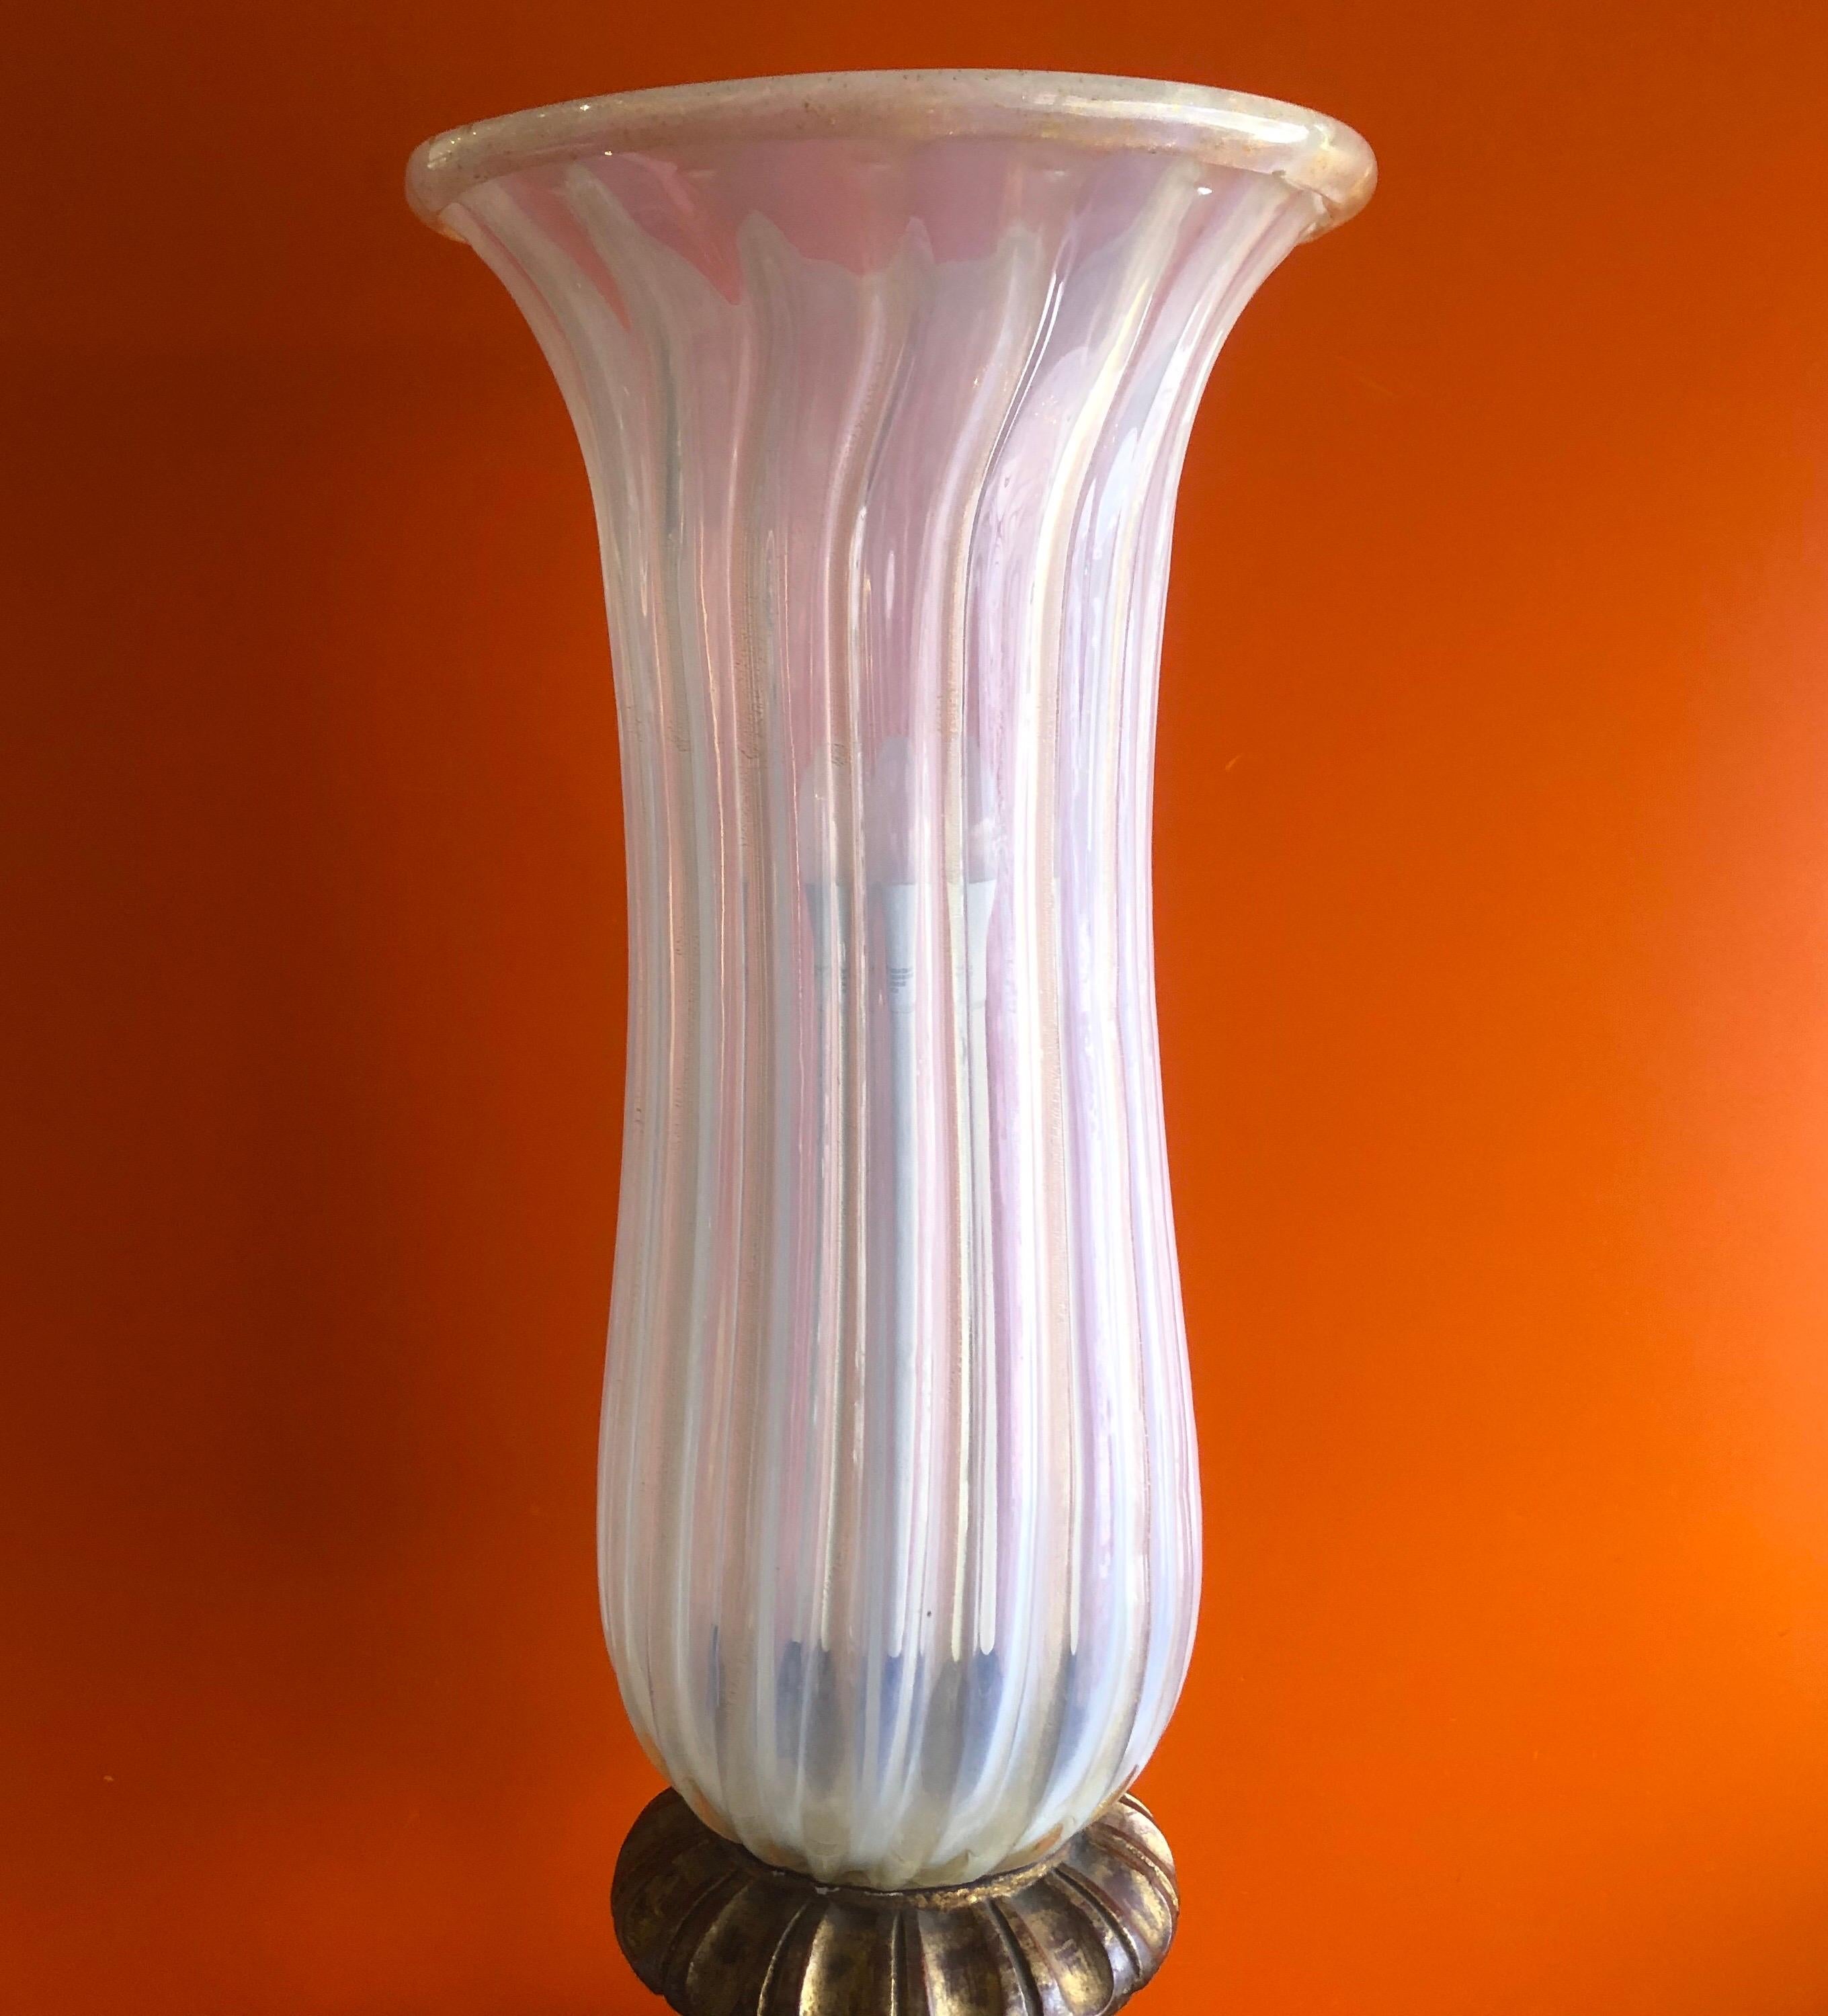 An elegant Hollywood Regency style torchiere lamp by Murano glass, circa 1950s. The glass shade is a cream color with gold flecks throughout and it sits on a gilted hand carved wooden base. Truly and impressive piece!